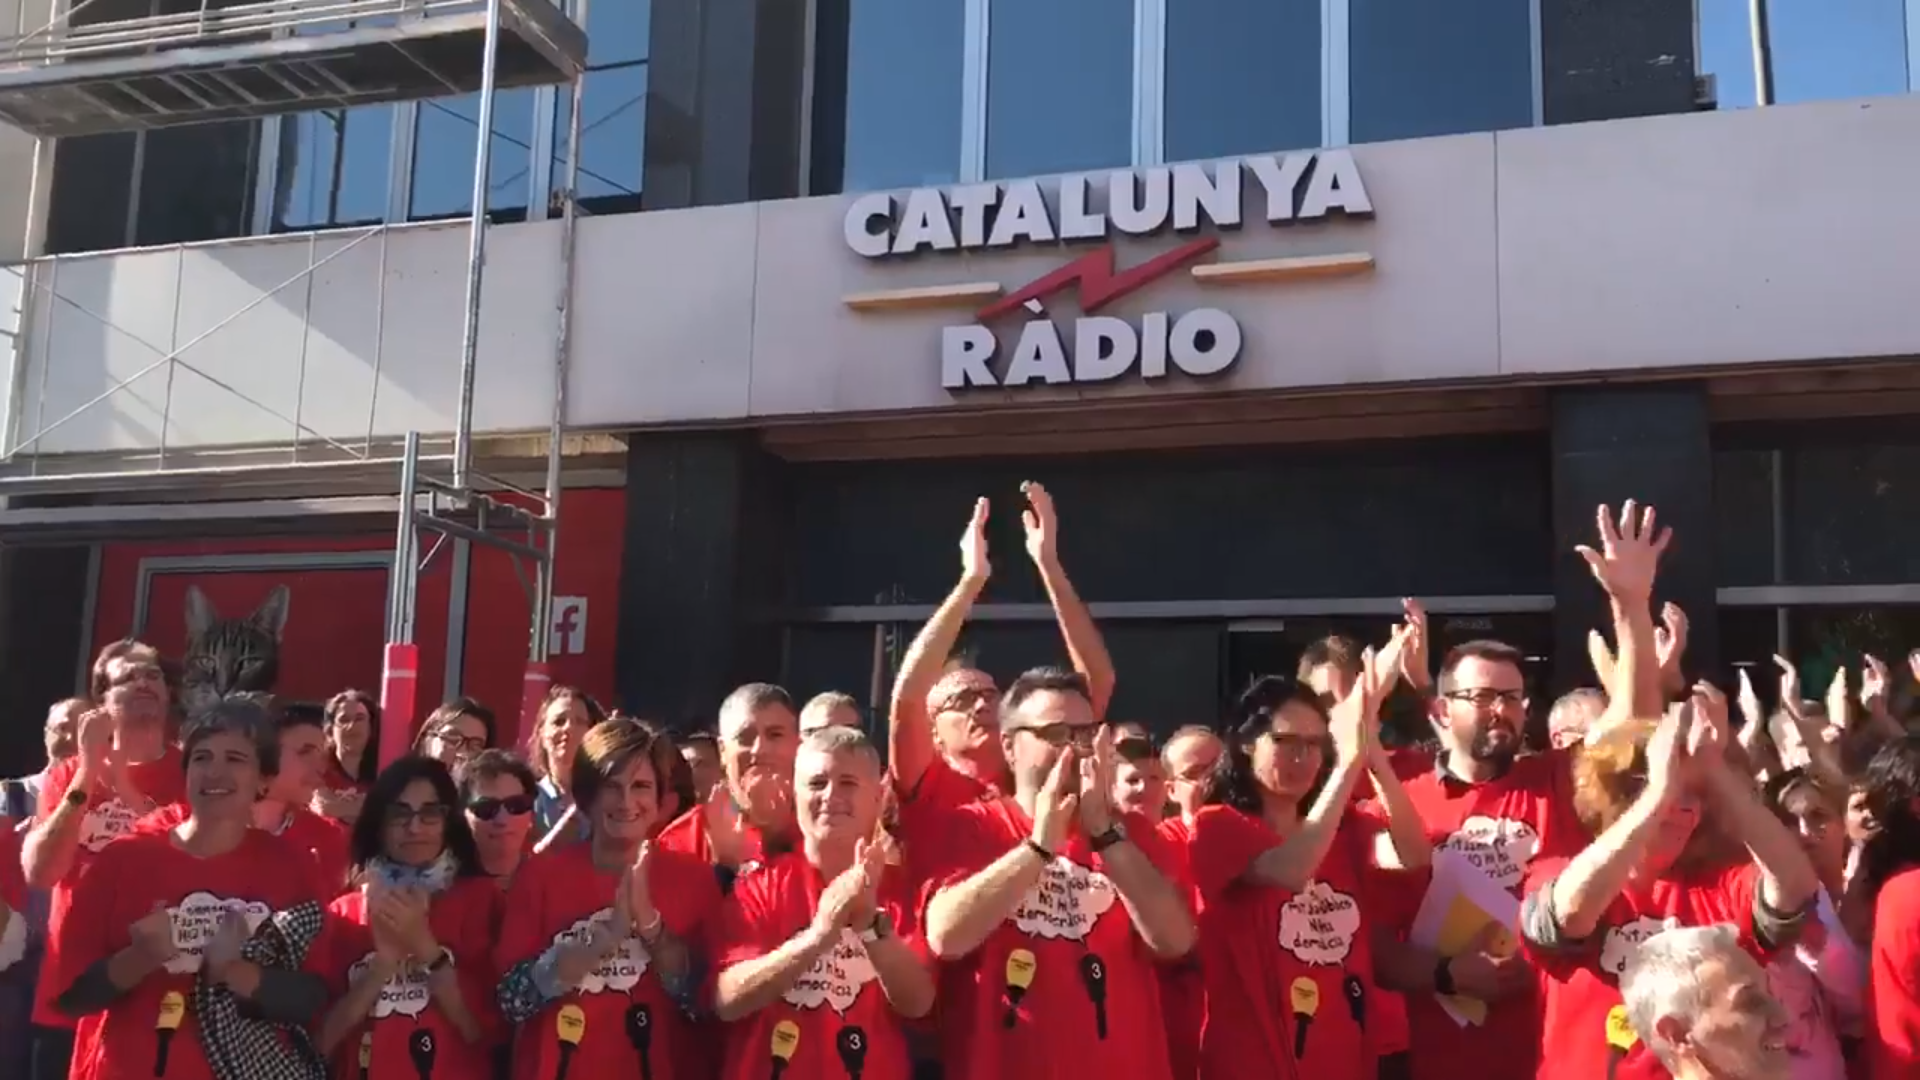 Staff at Catalan public broadcasters stand up to threat of intervention